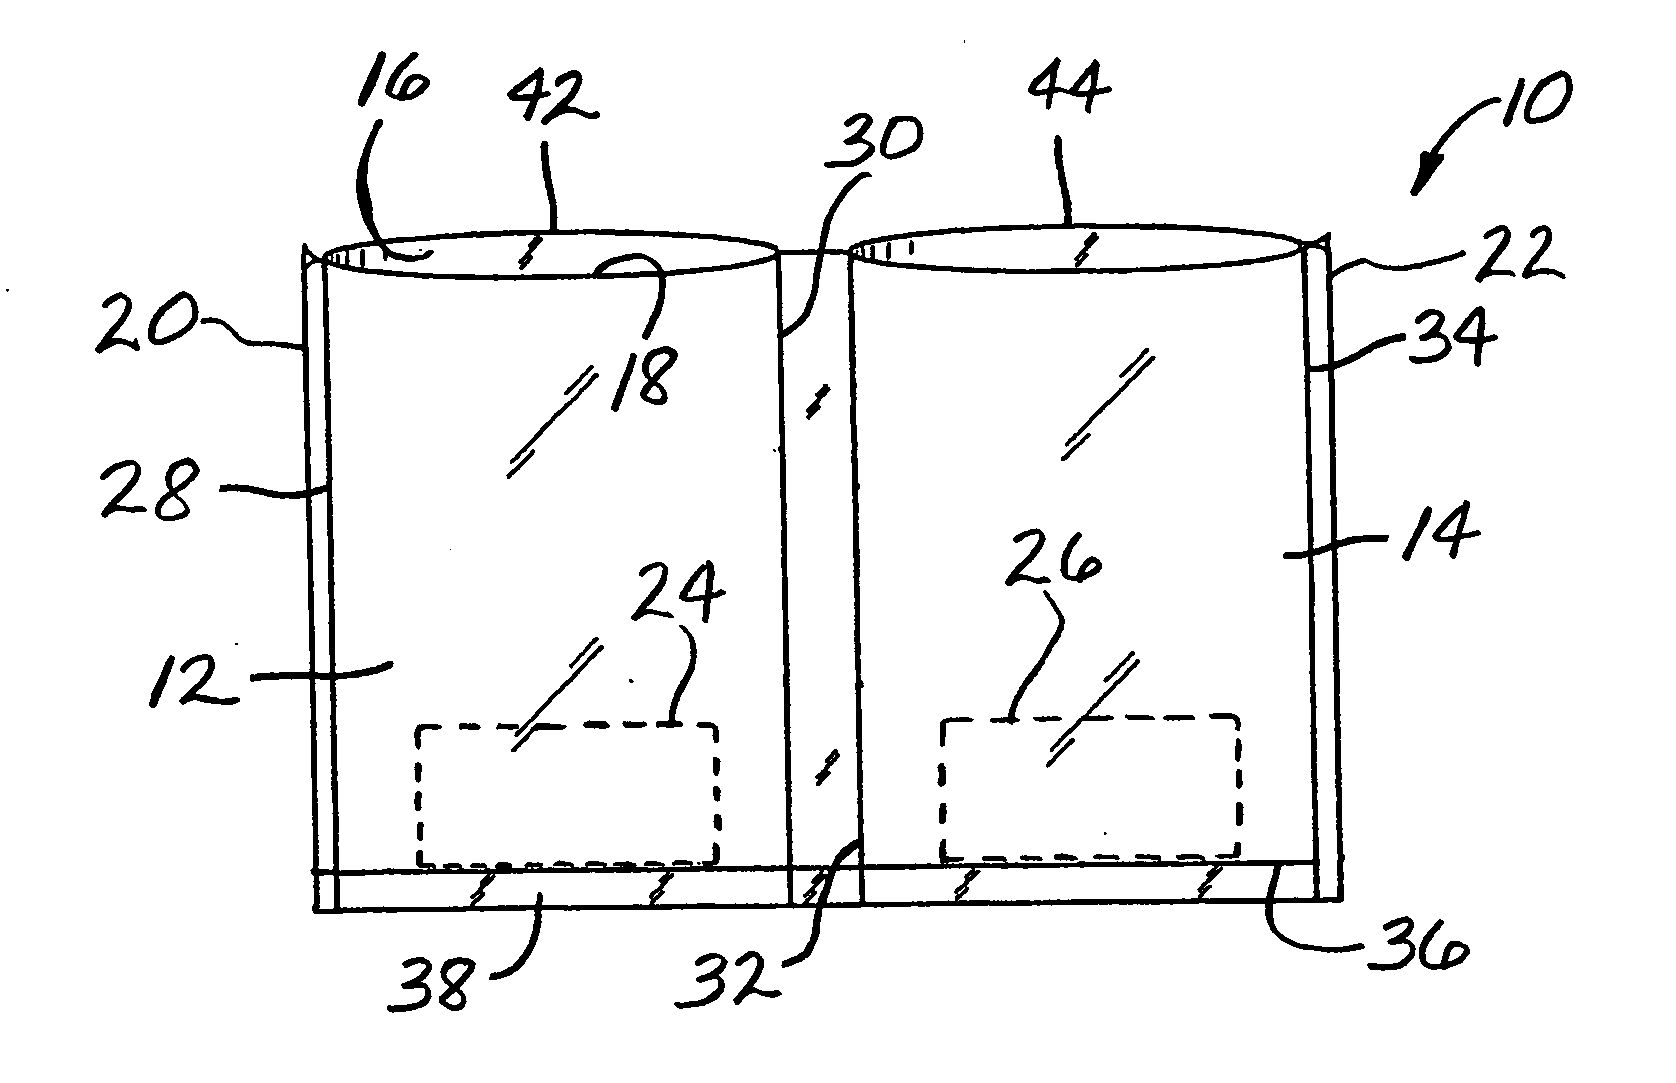 Sets of pre-padded bags and methods of making same